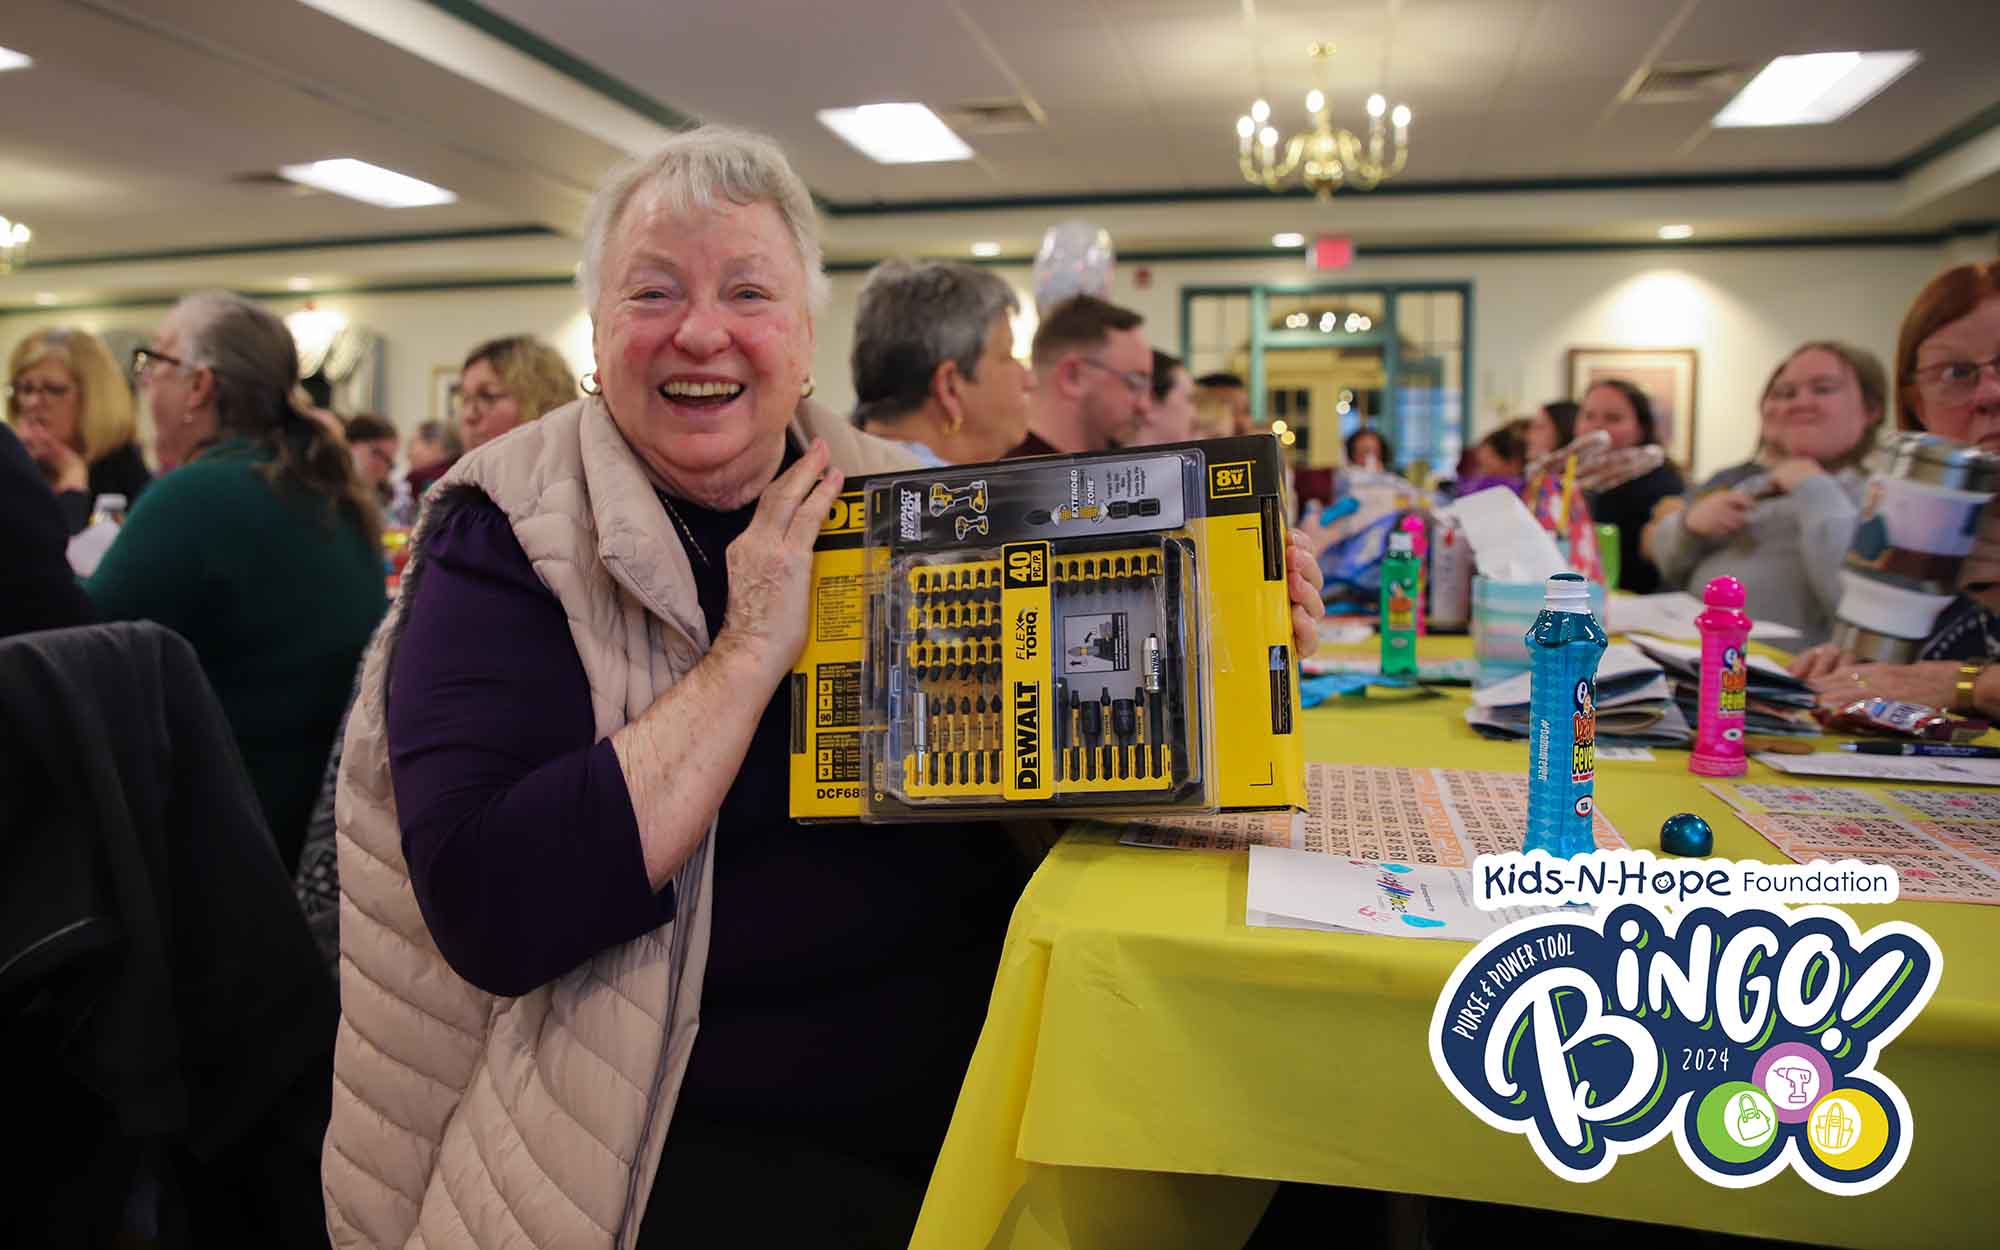 Winners from the Kids-N-Hope Foundation’s Spring Purse and Power Tool Bingo won designer purses and handbags as well as power and hand tools from a variety of brands.